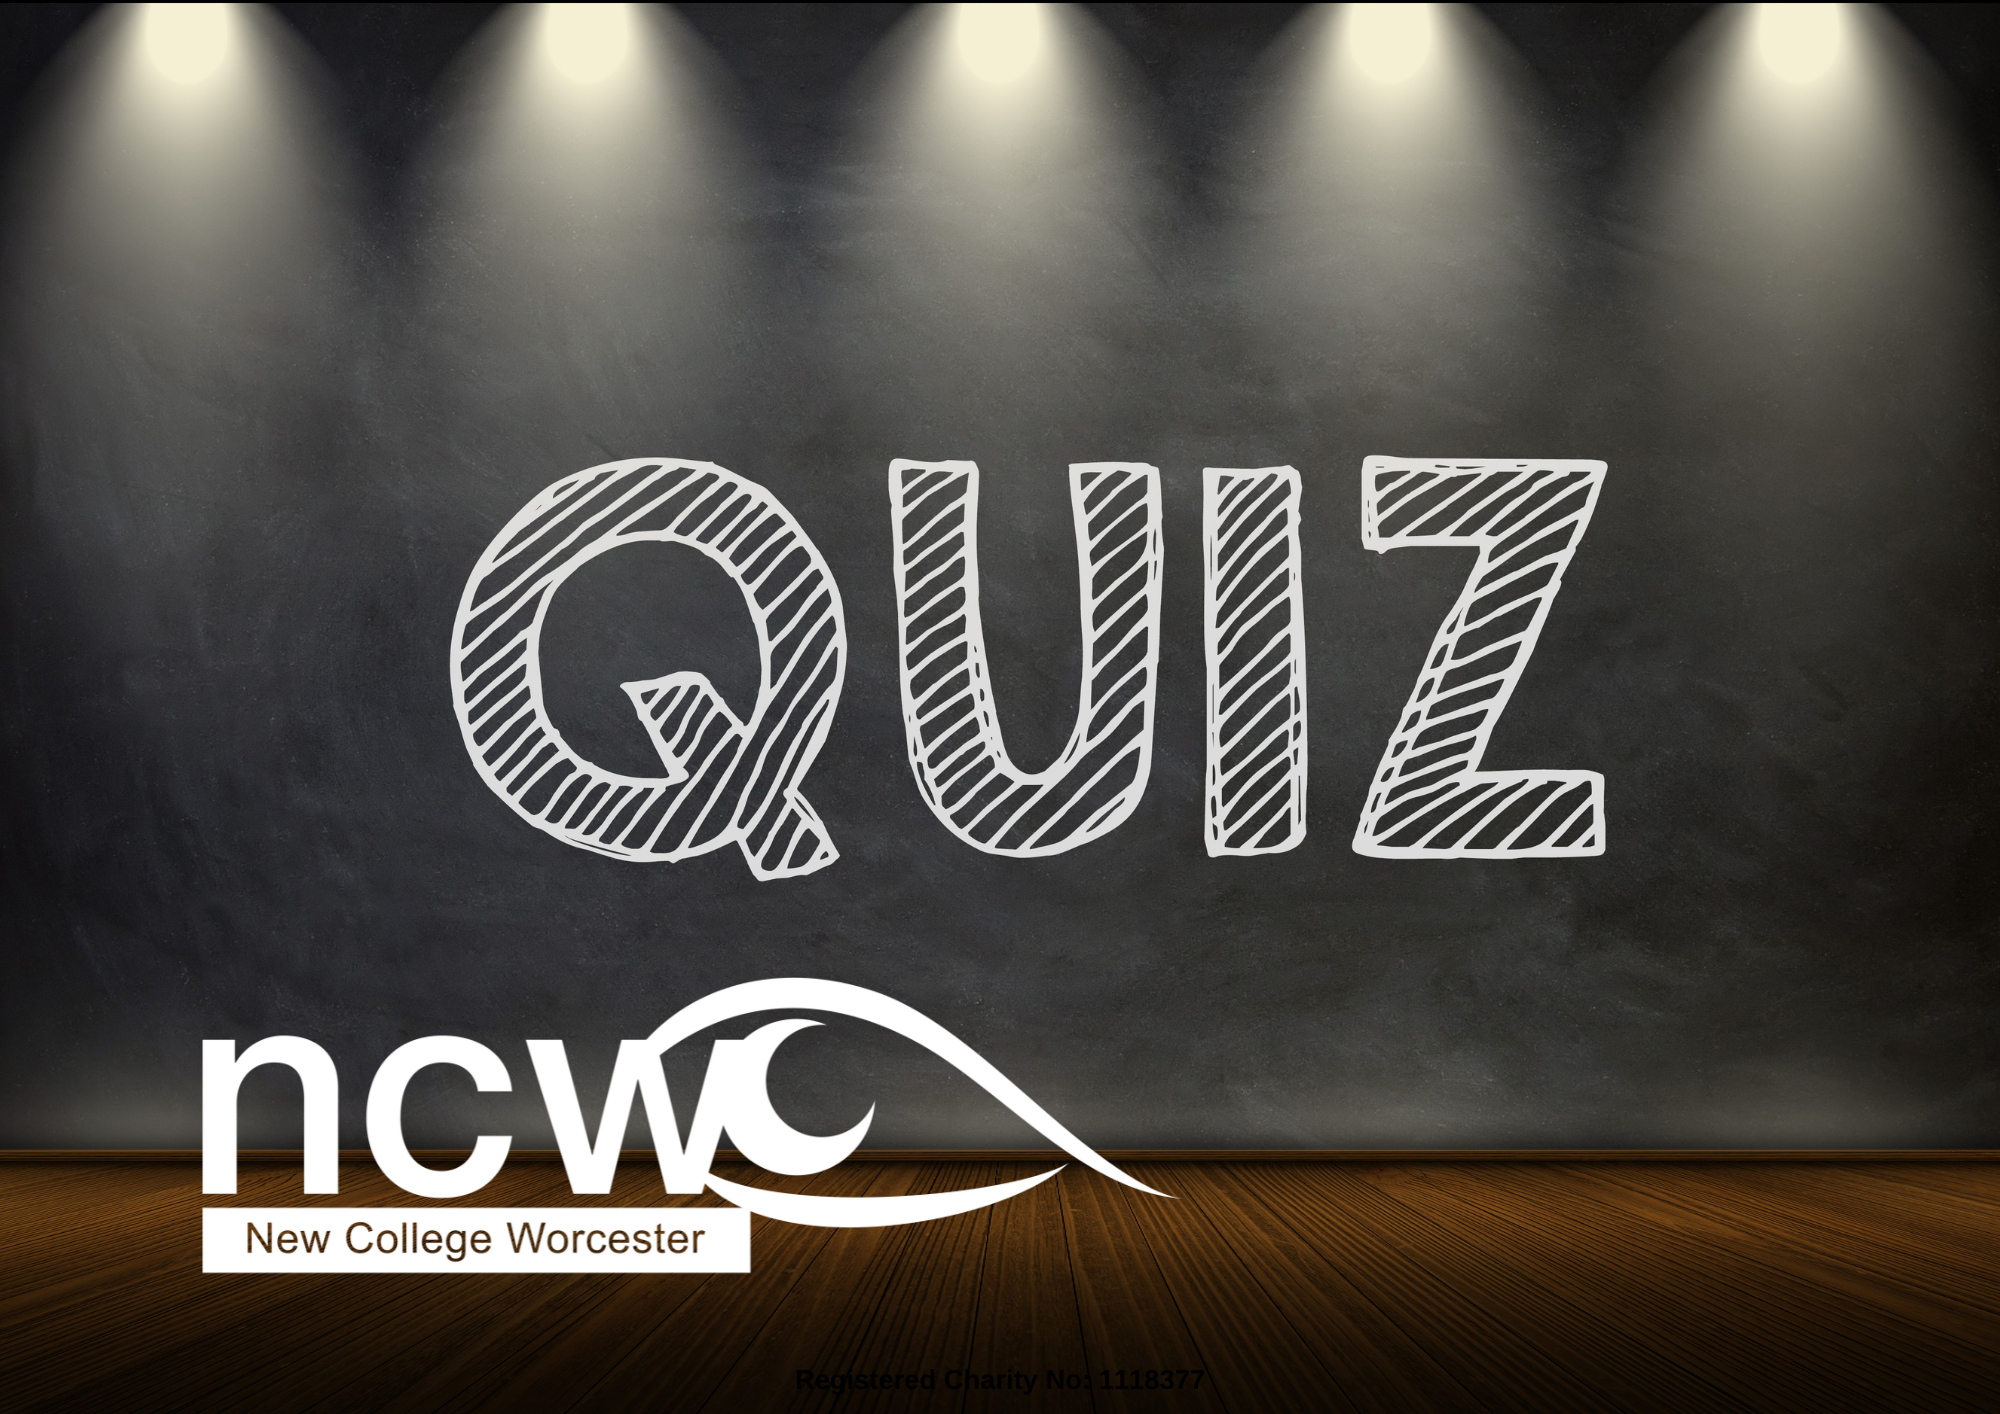 image of a black board with 'QUIZ' in chalk. There are lights shining down on to the text and the white NCW logo in the left corner